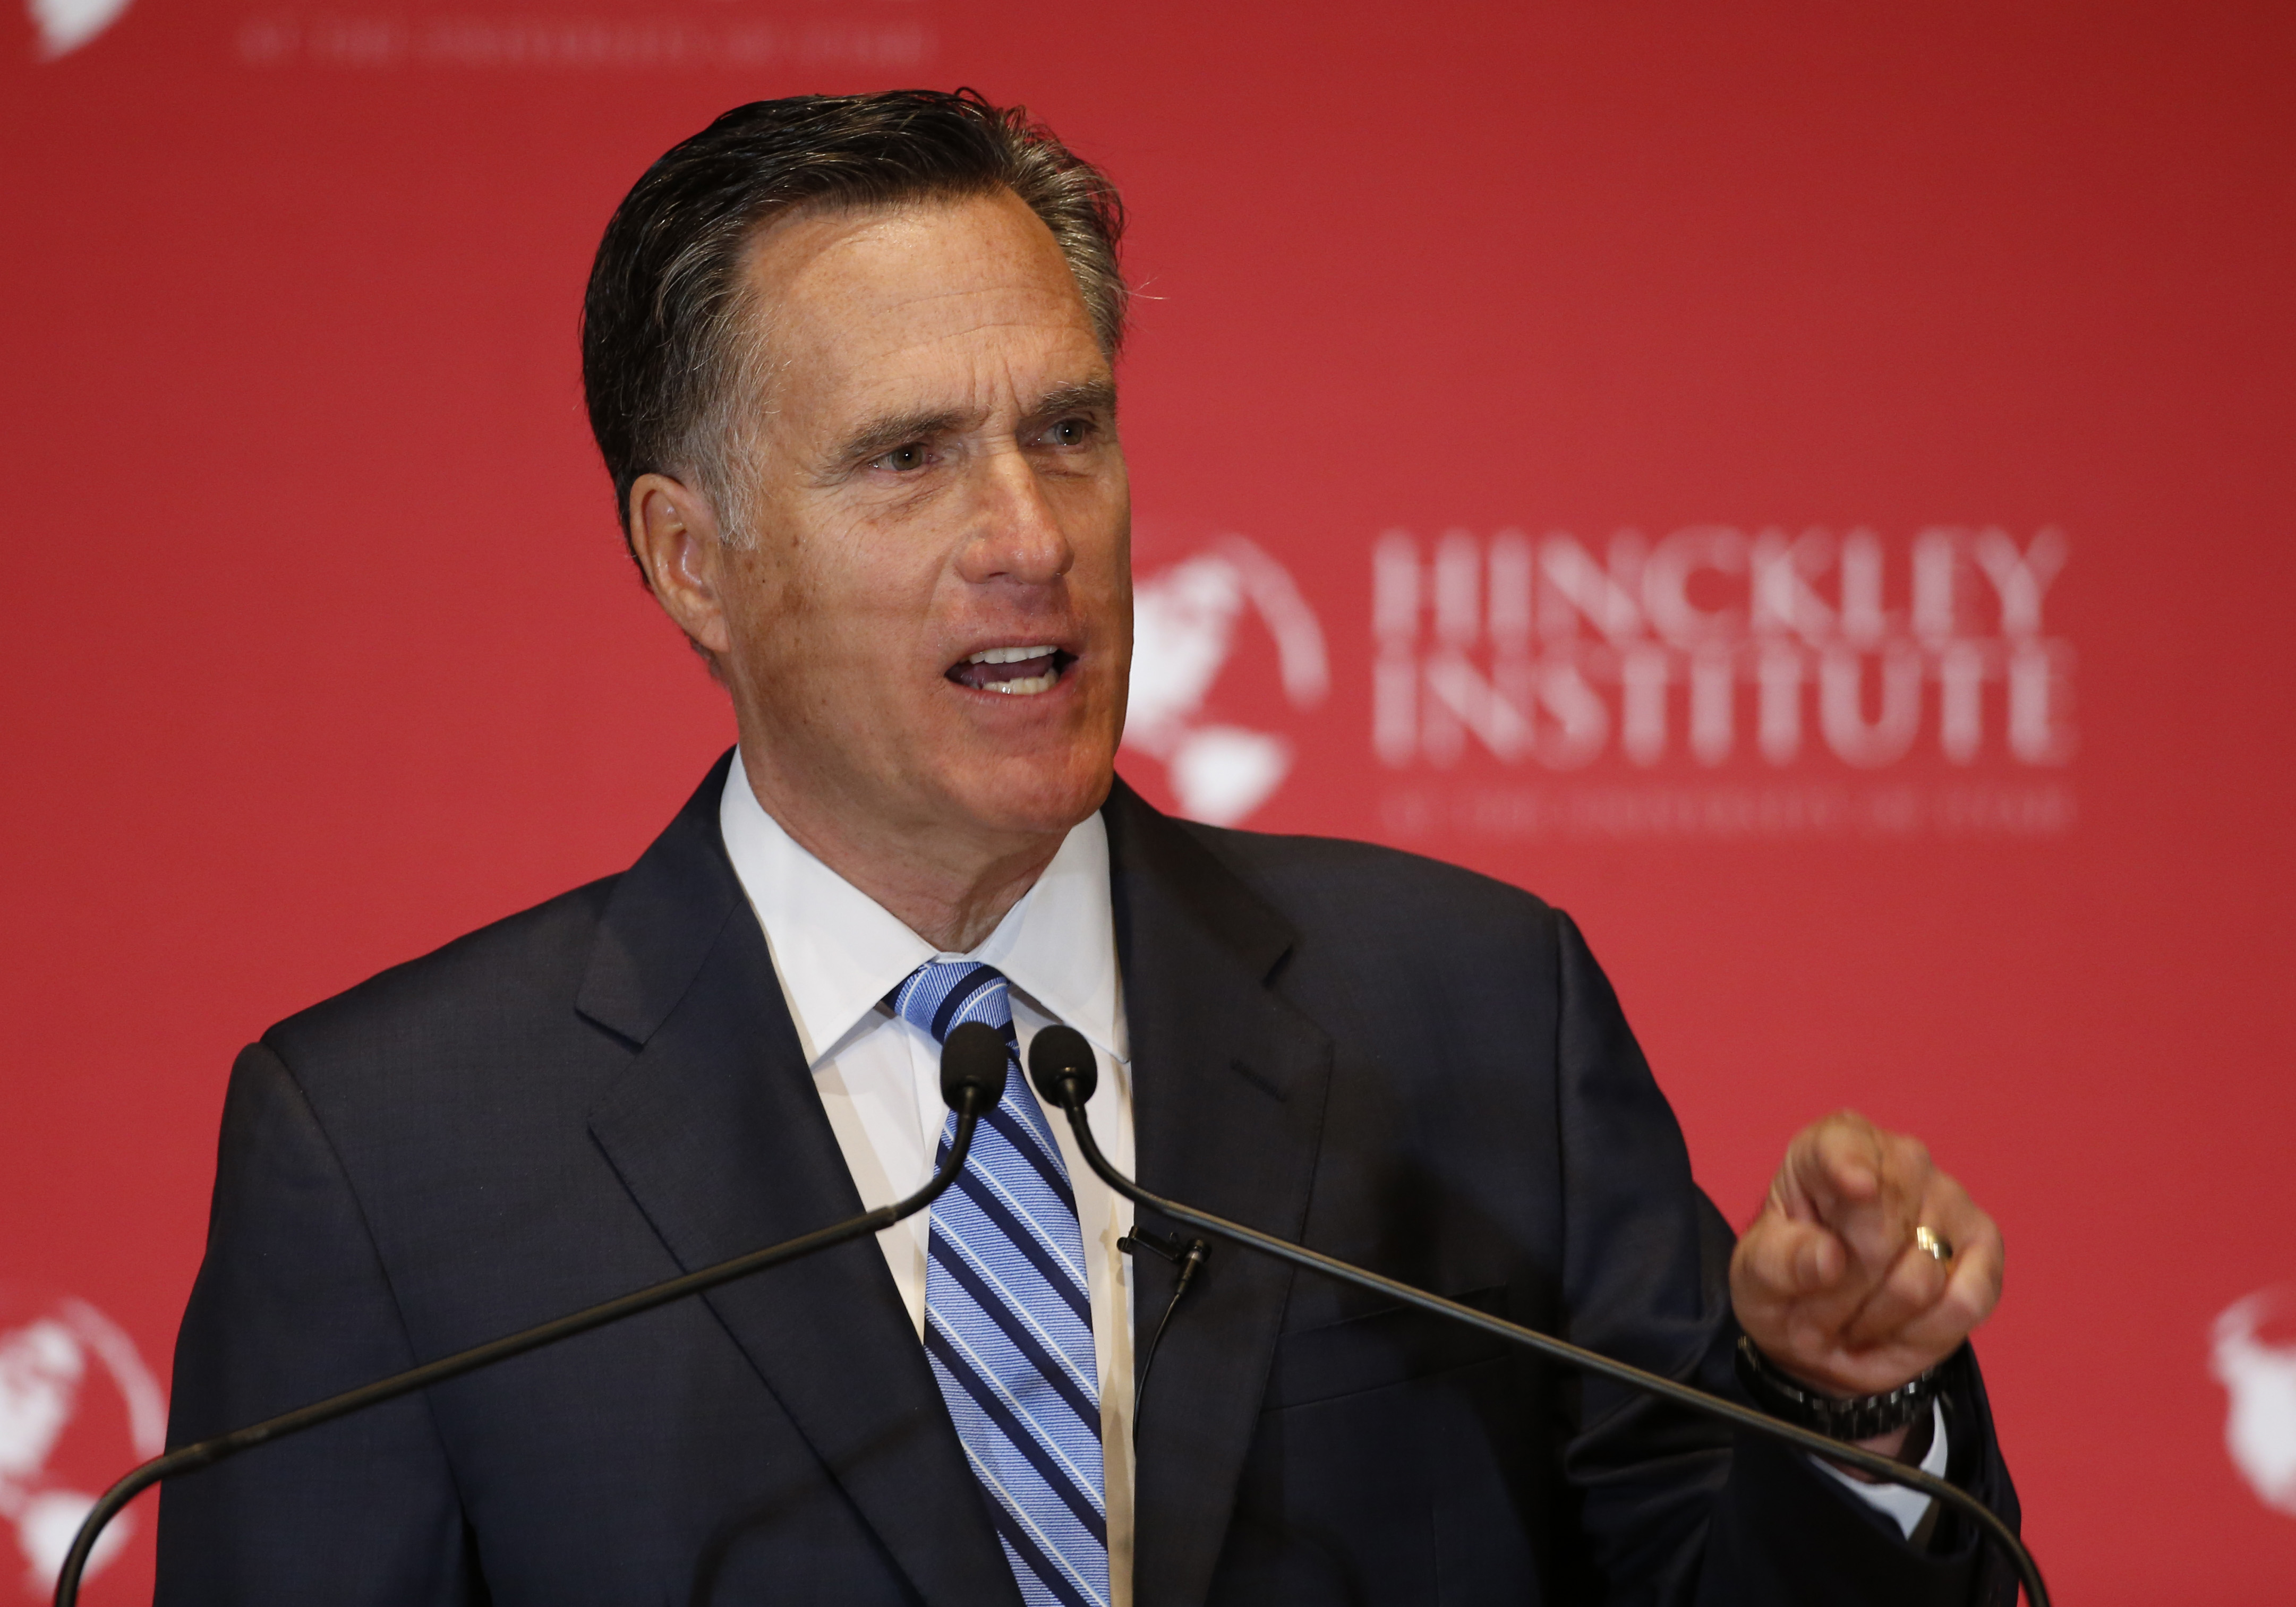 Former Massachusetts Gov. Mitt Romney gives a speech on the state of the Republican party at the Hinckley Institute of Politics on the campus of the University of Utah on March 3, 2016 in Salt Lake City, Utah. (George Frey/Getty Images)